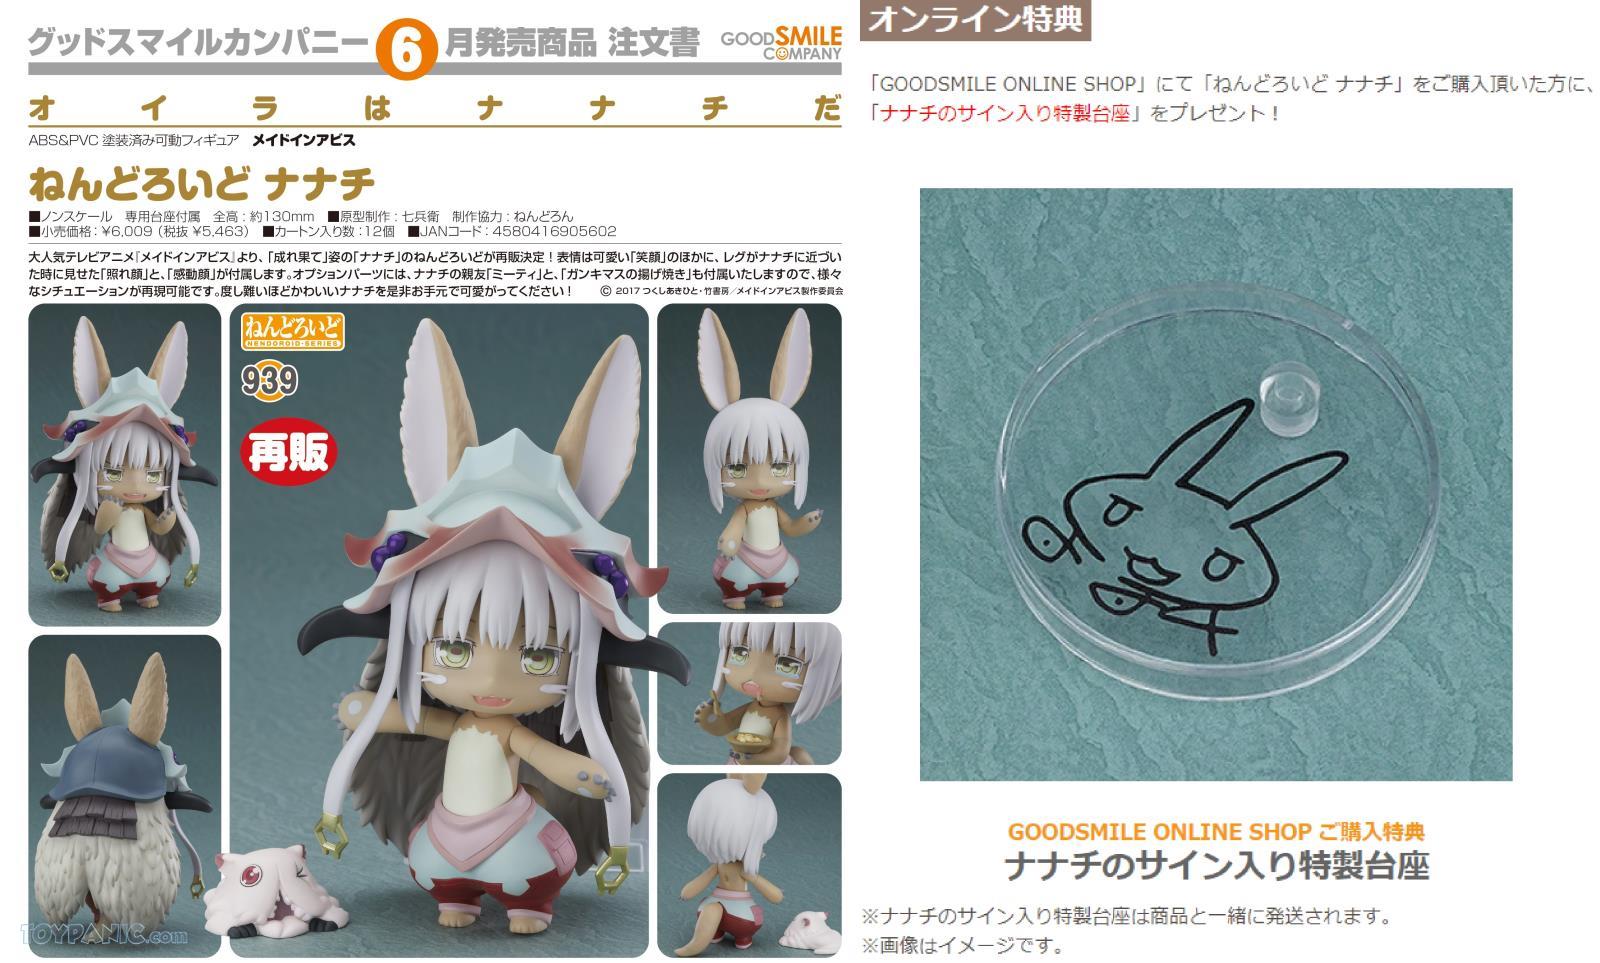 Nendoroid Nanachi Made In Abyss Sp Version Only Myr408 00